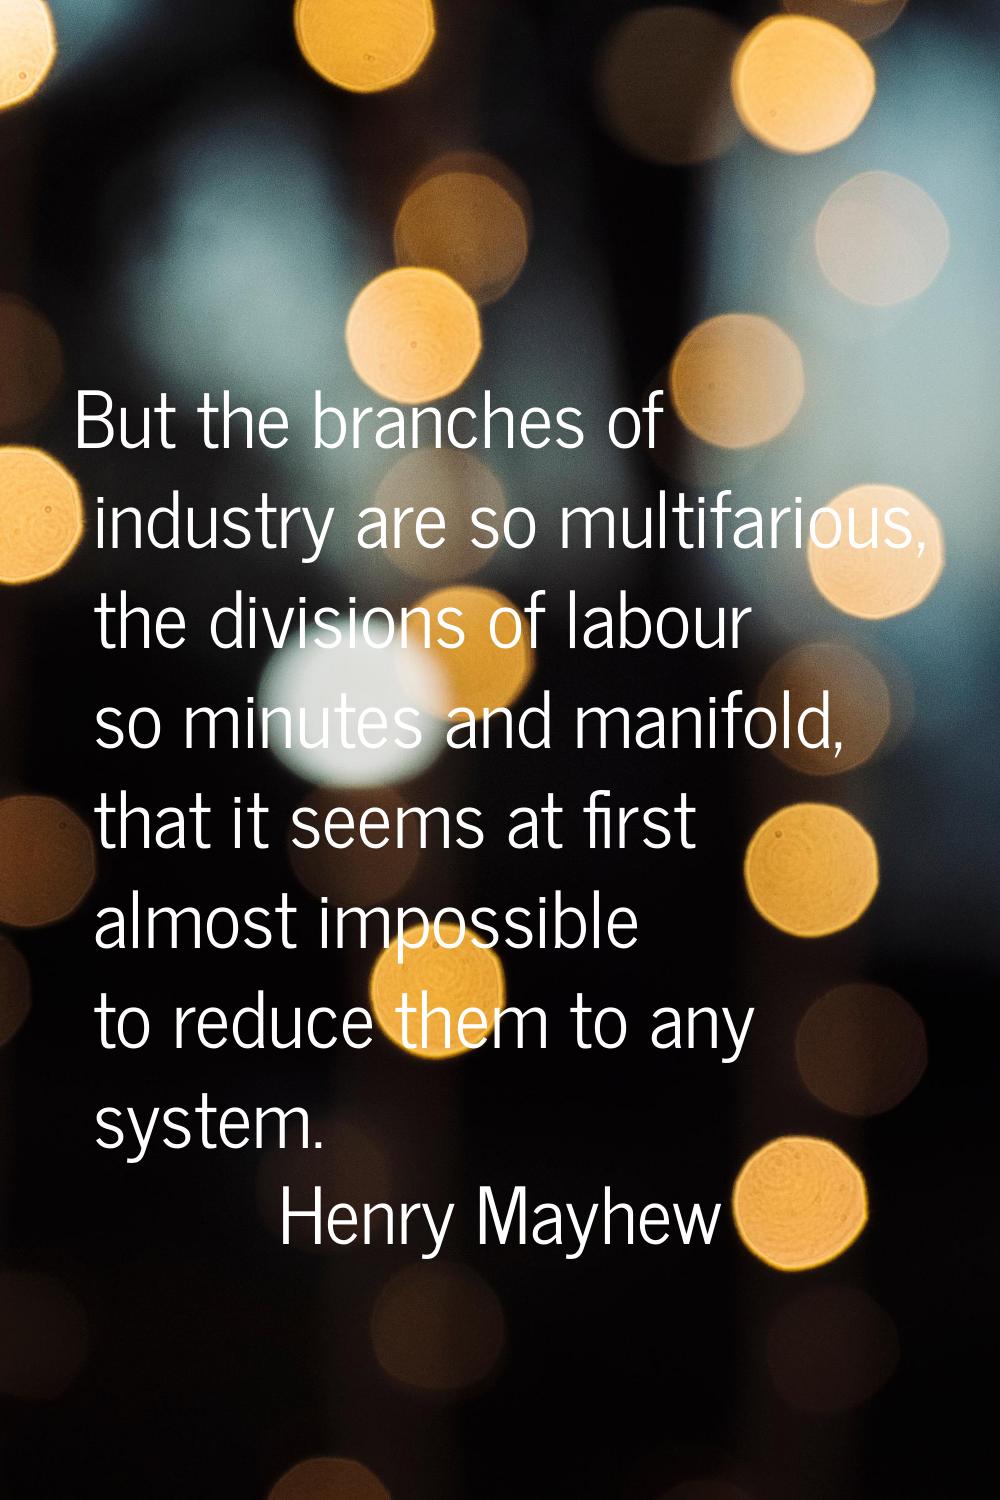 But the branches of industry are so multifarious, the divisions of labour so minutes and manifold, 